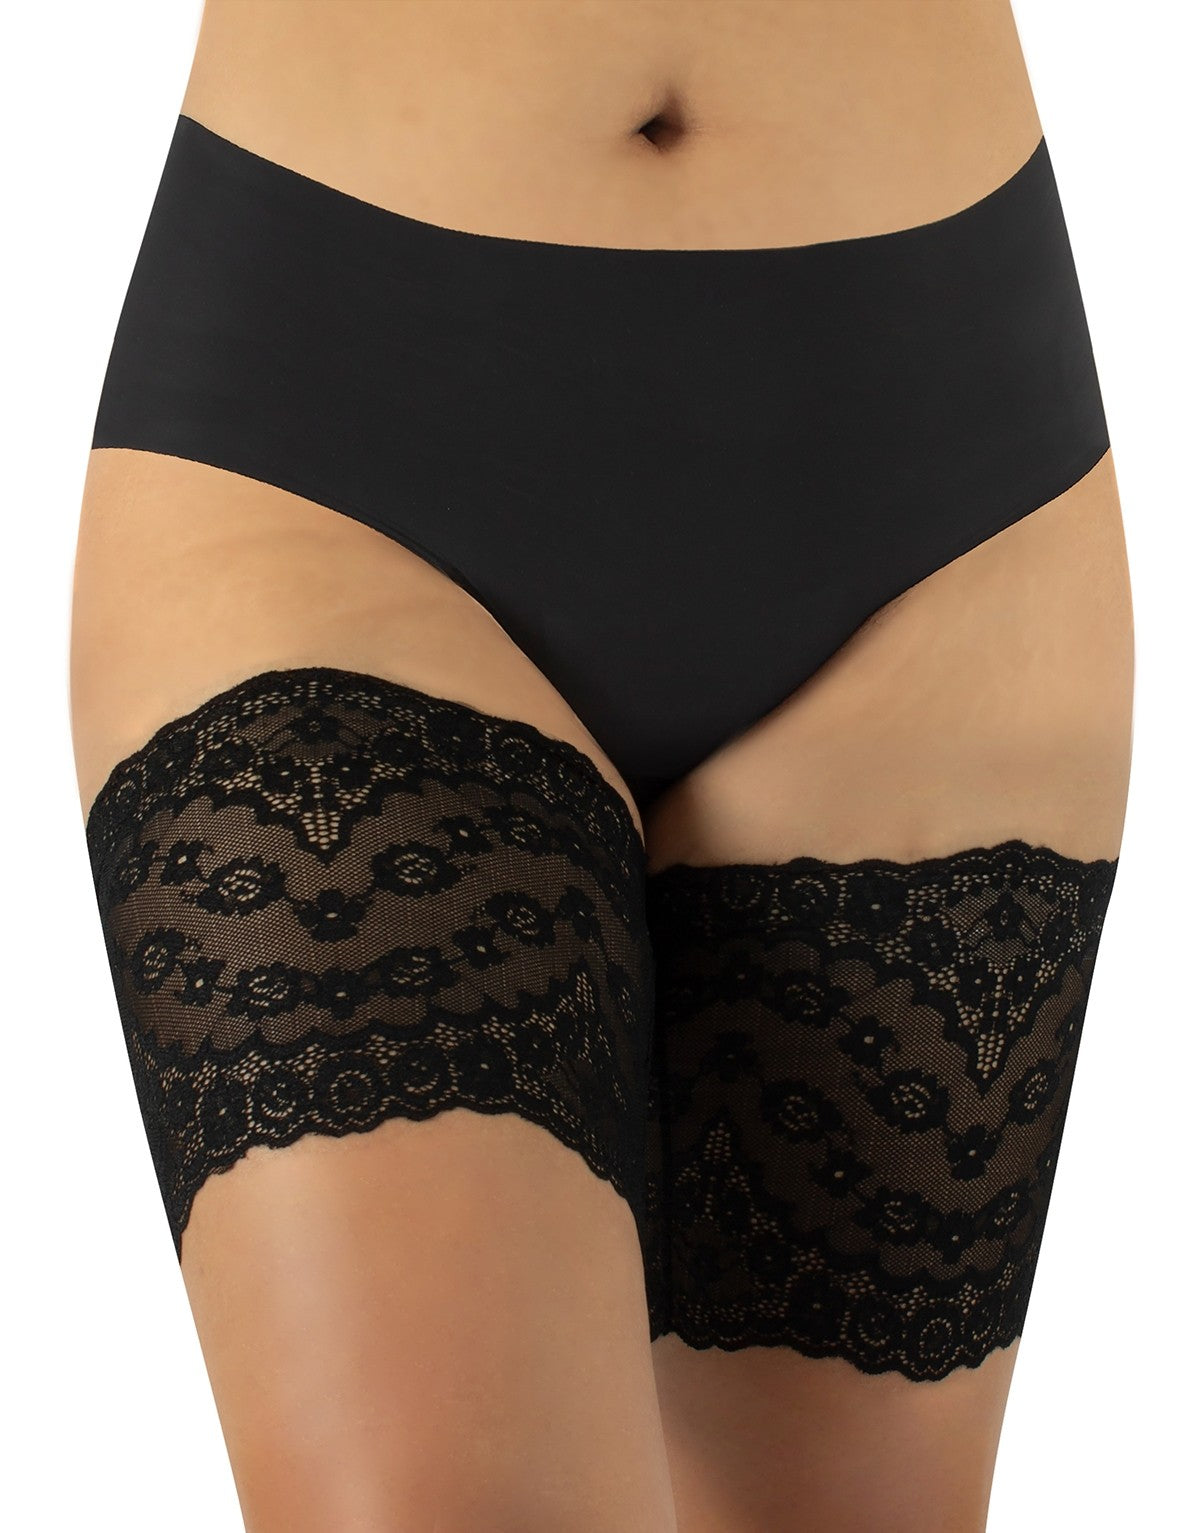 Calzitaly INT0017 Anti-Chafing Bands - black floral lace thigh bands to help prevent chub rub